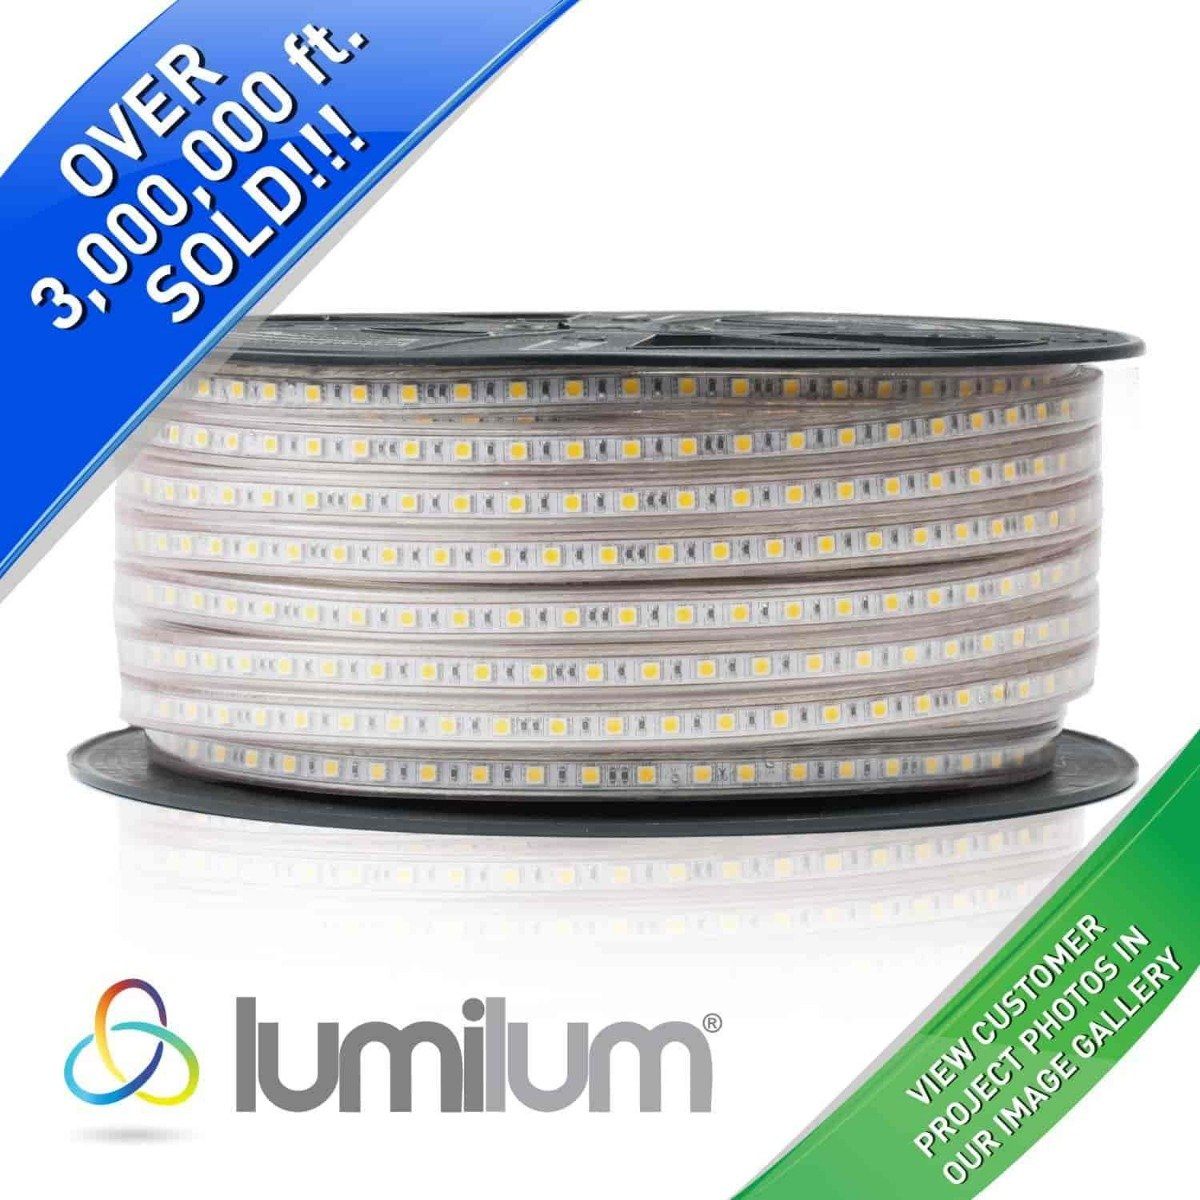 120v led strip light on white background with diagonal blue and green text banners